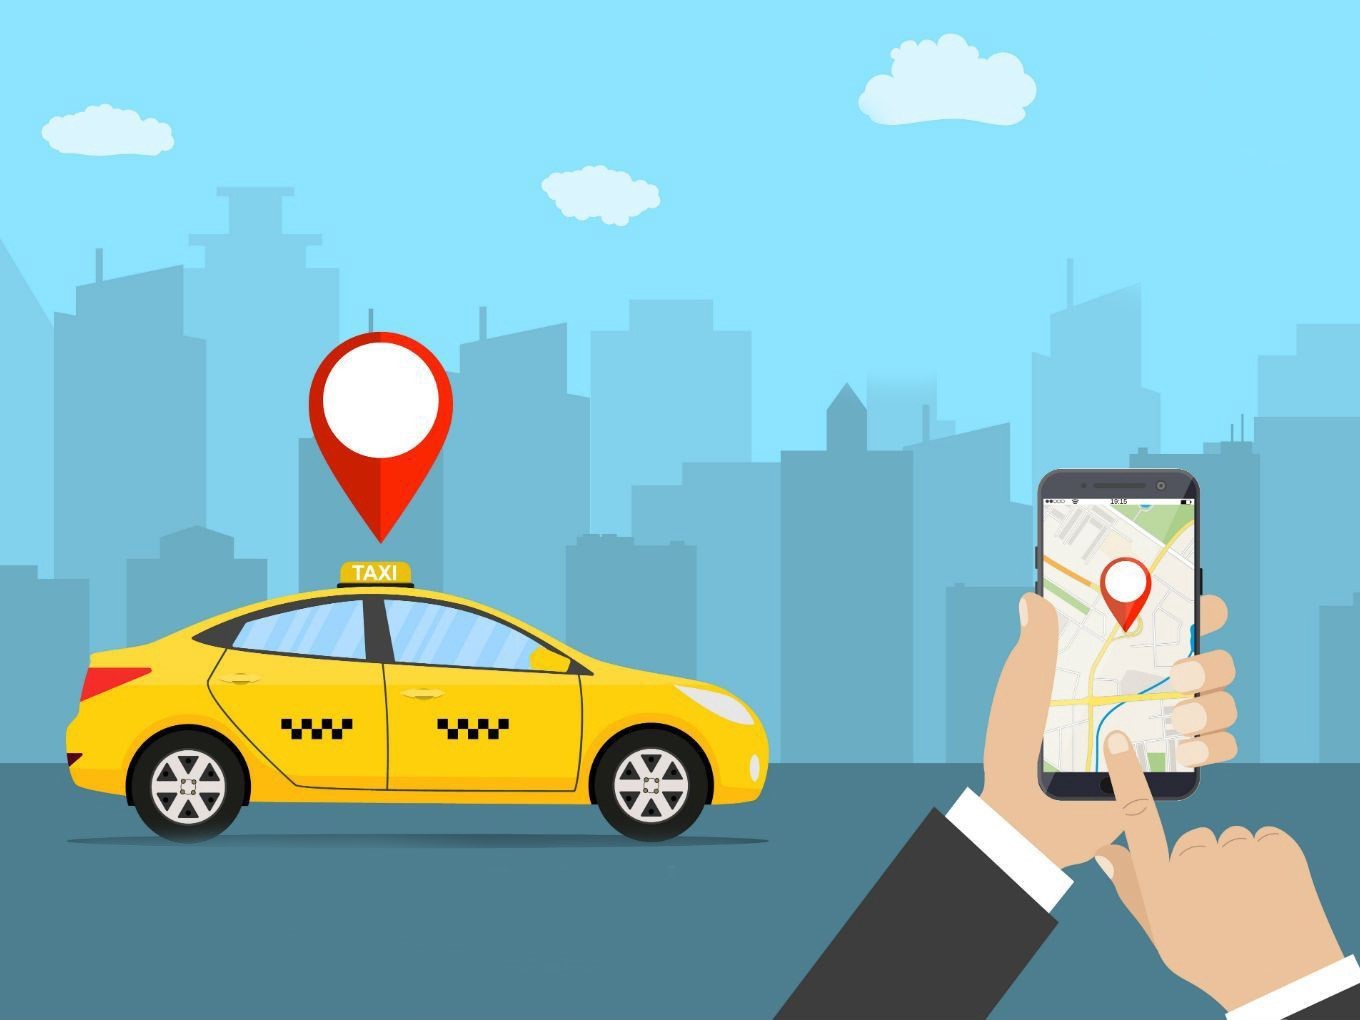 Best Tips for Finding Taxi Services